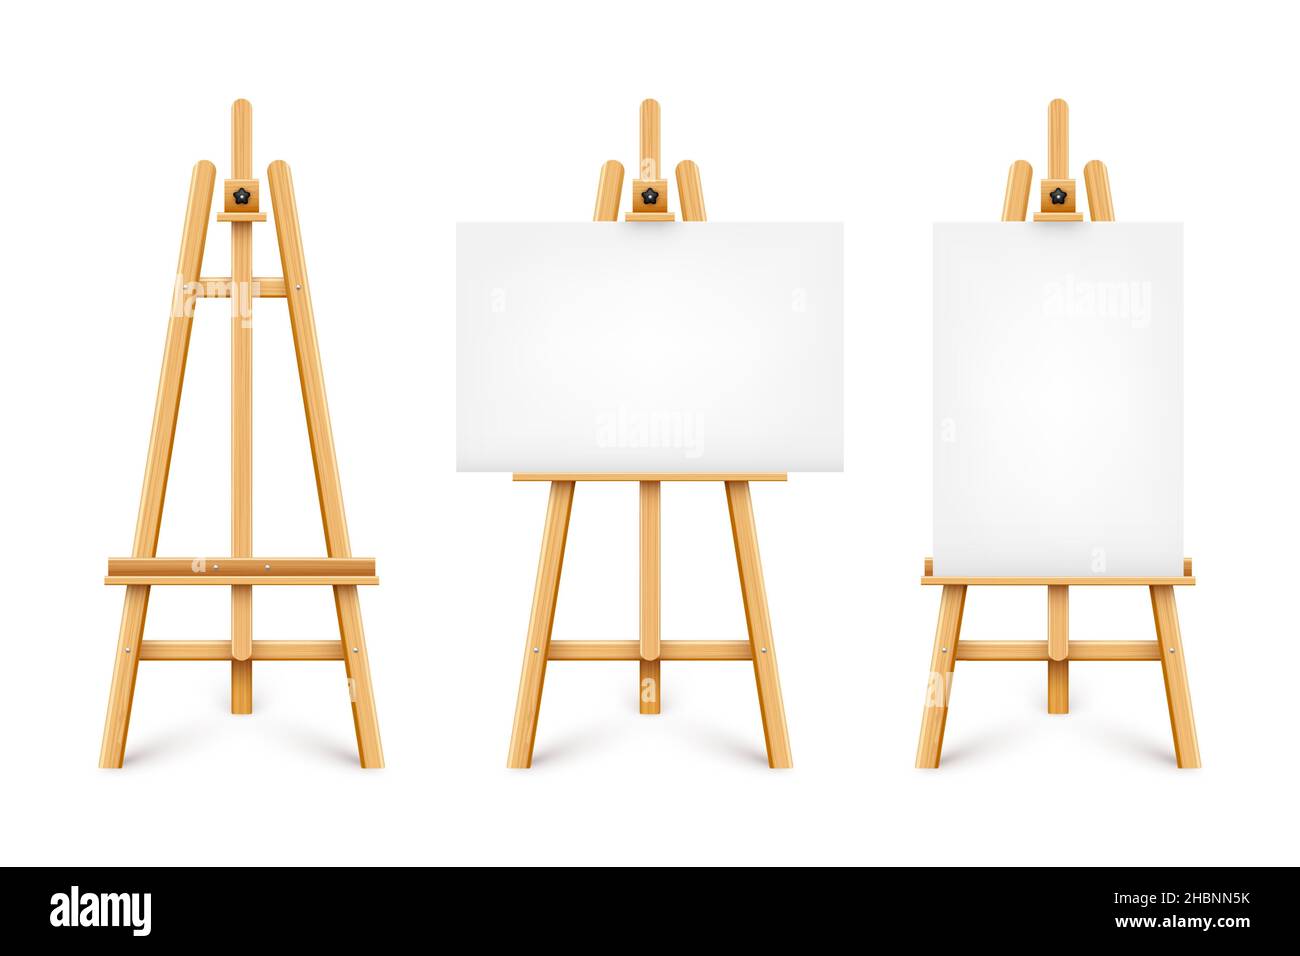 https://c8.alamy.com/comp/2HBNN5K/realistic-paint-desk-with-blank-white-canvas-wooden-easel-and-a-sheet-of-drawing-paper-presentation-board-on-a-tripod-artwork-mockup-template-2HBNN5K.jpg